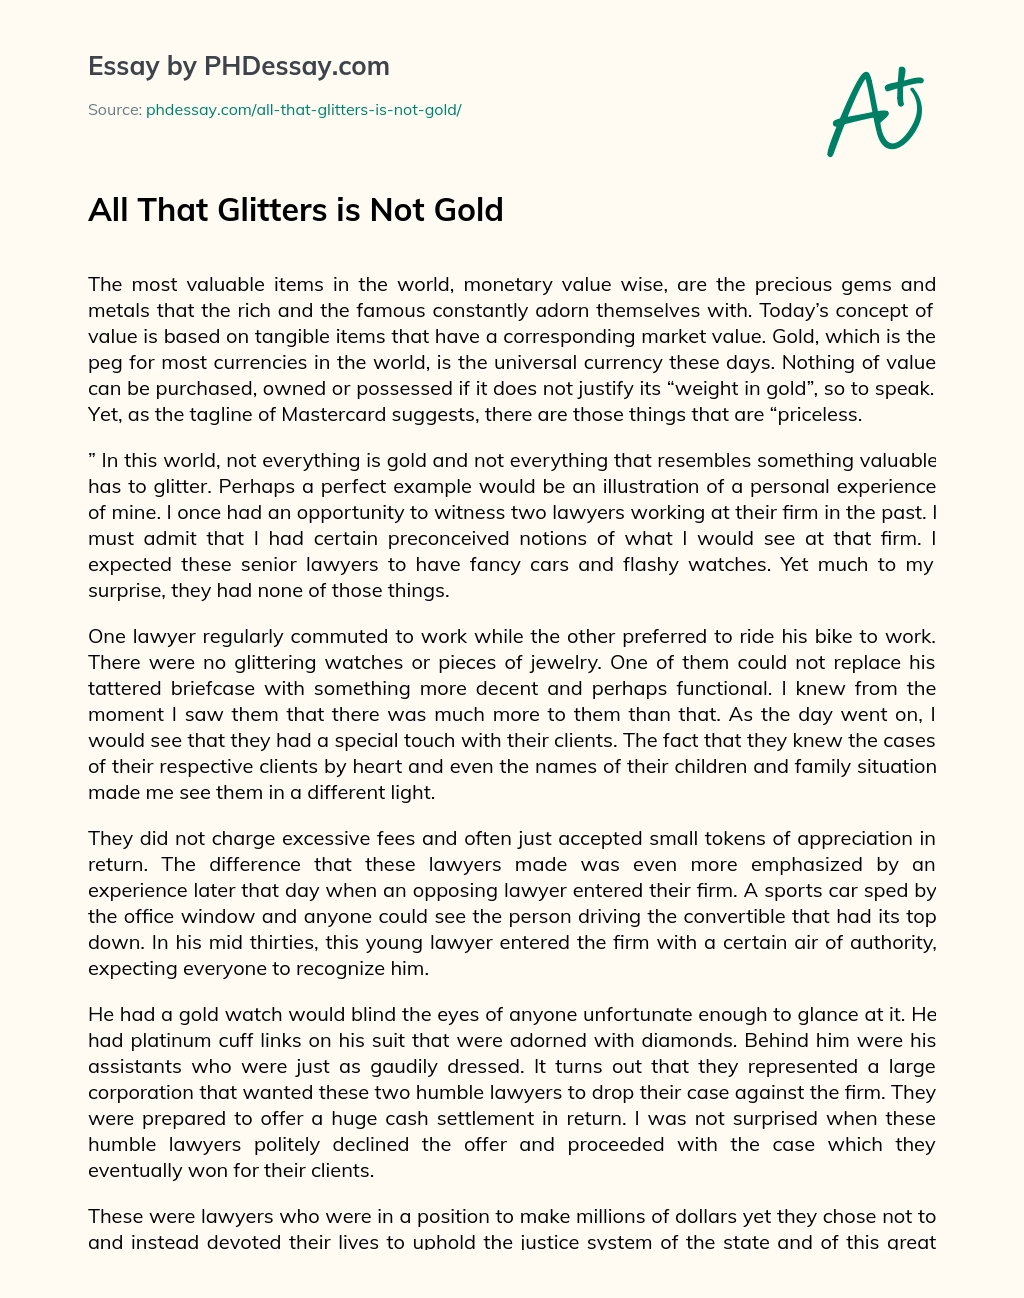 all that glitters is not gold images